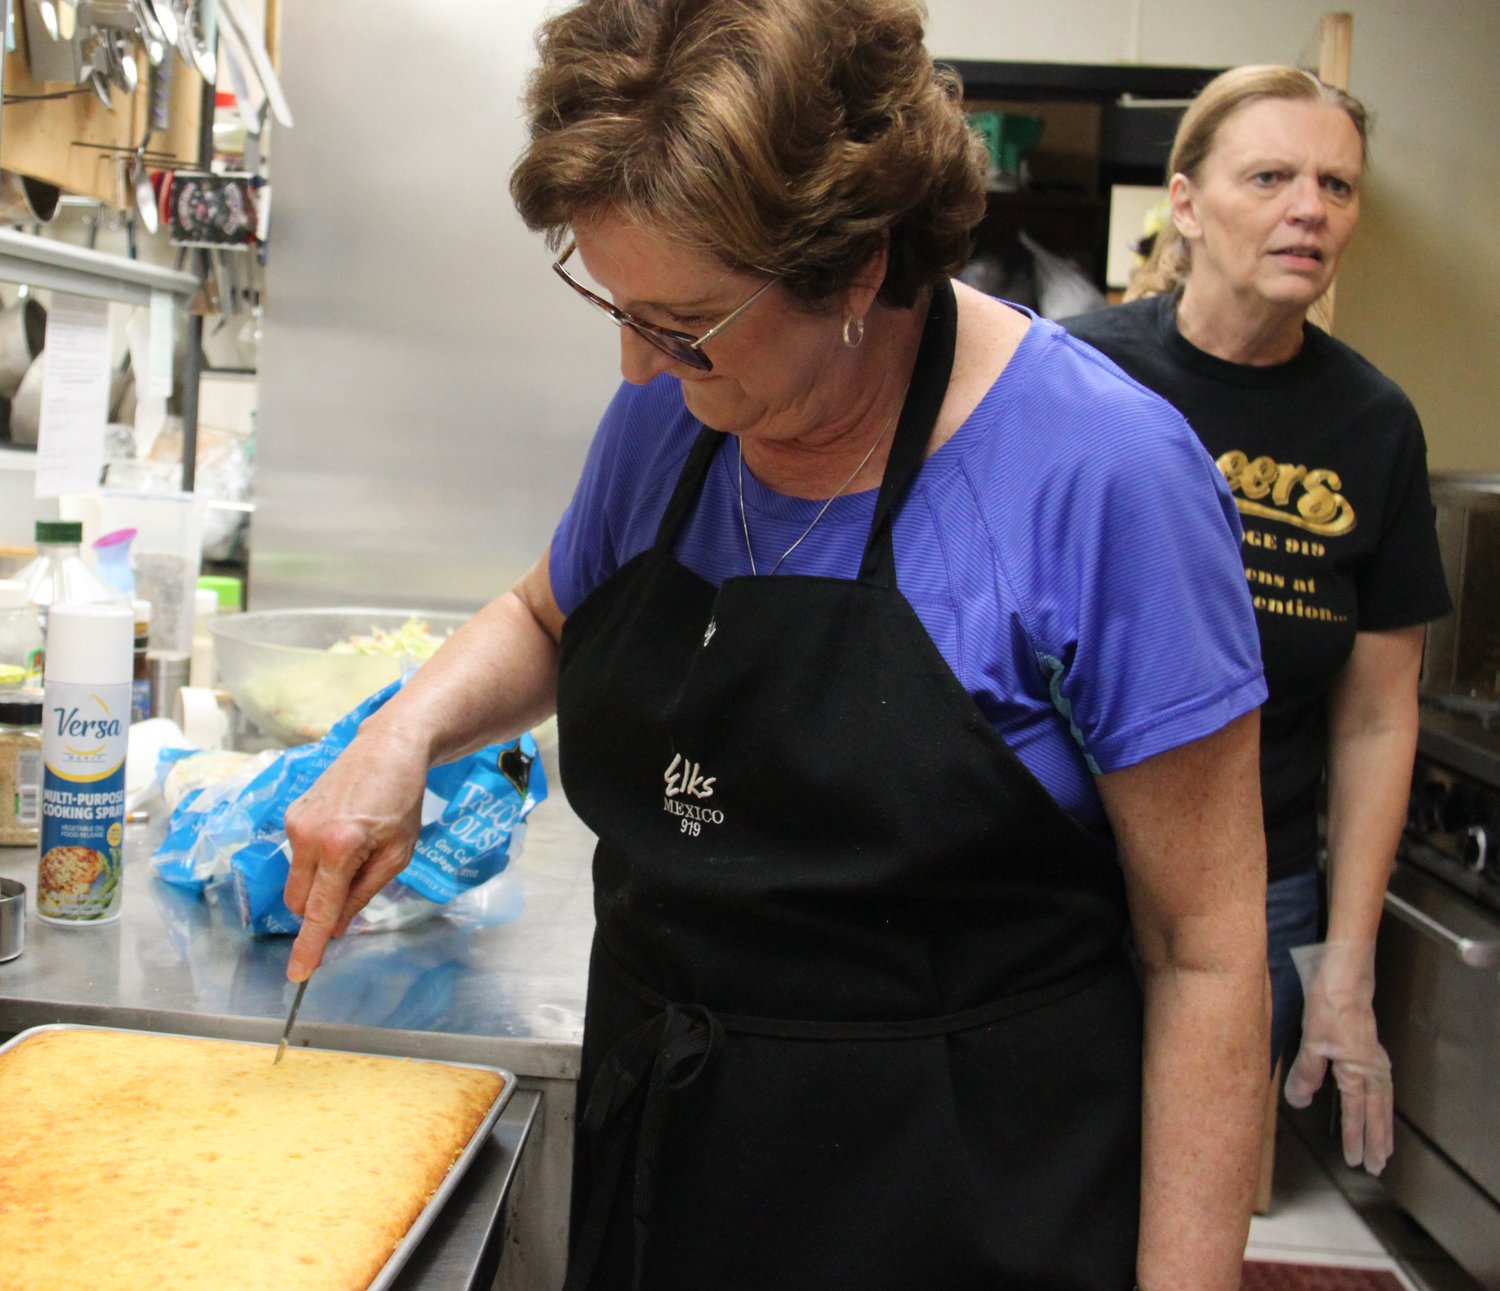 Judy Fry ignores the commotion around her in the Elks Lodge kitchen as she slices cornbread. The Elks host regular fried fish meals for members and their guests. [Dave Faries]